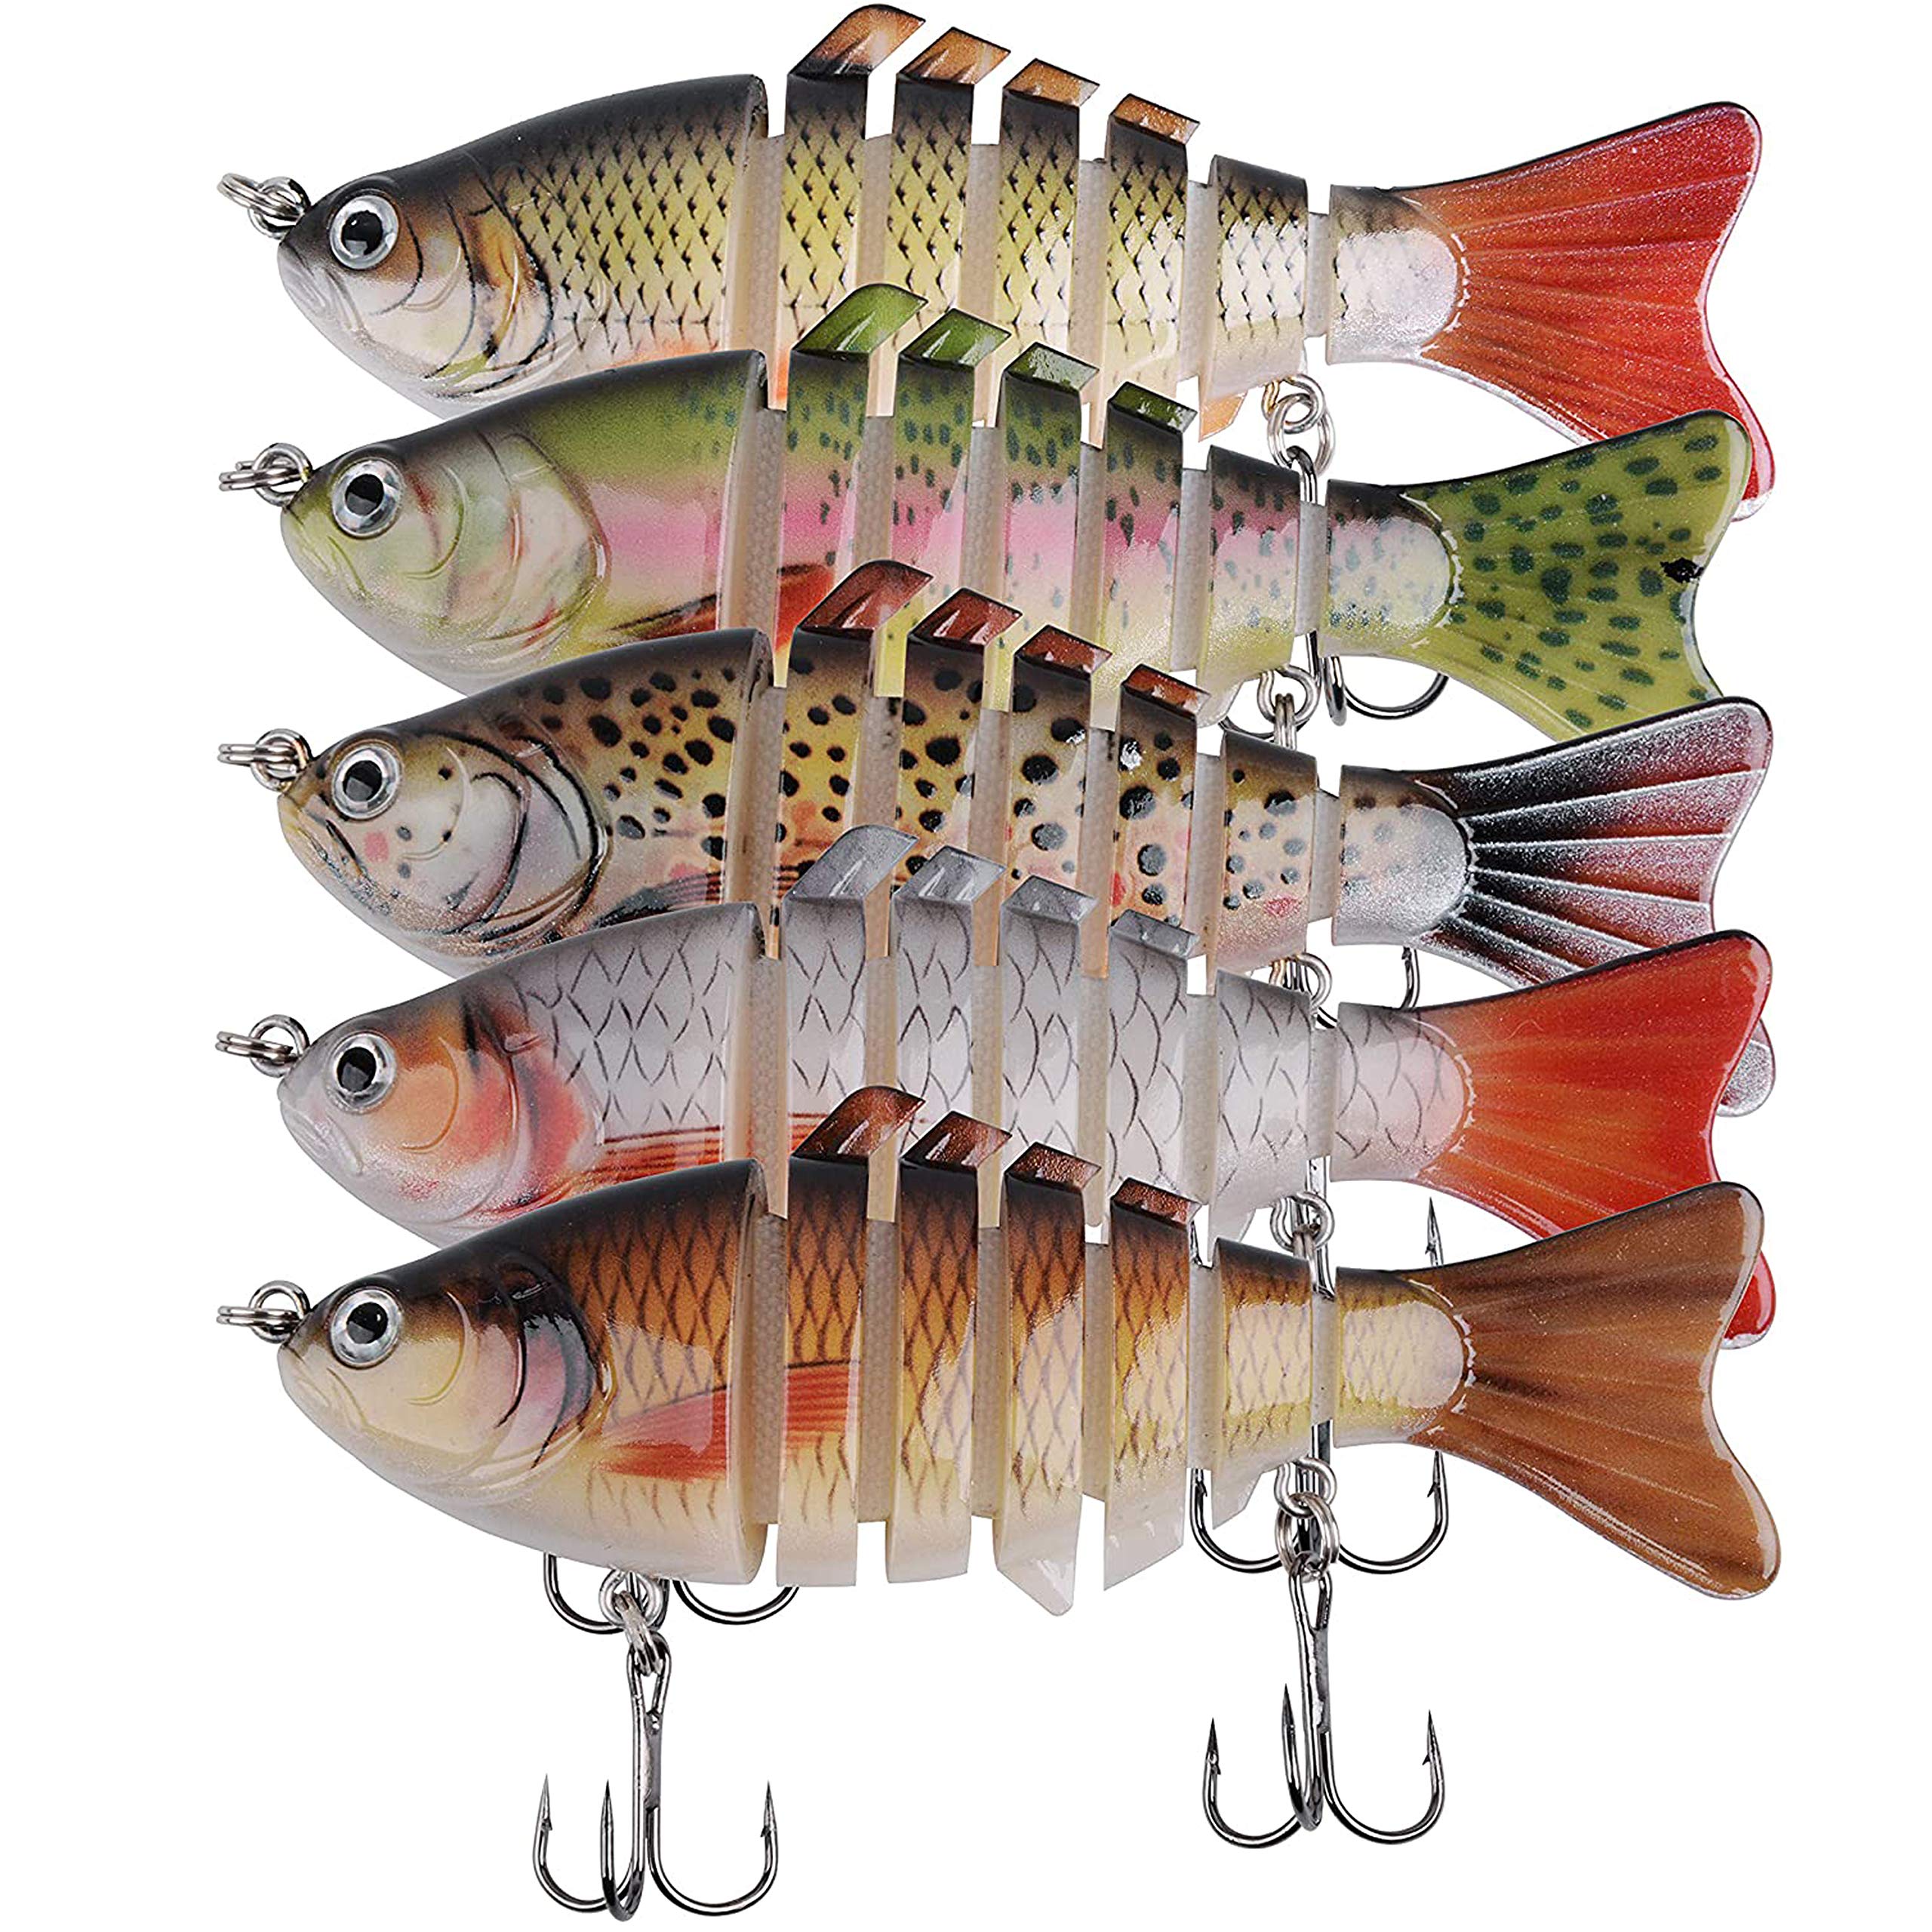 Realistic Multi Jointed Fish Lure Kit - Ideal for UK